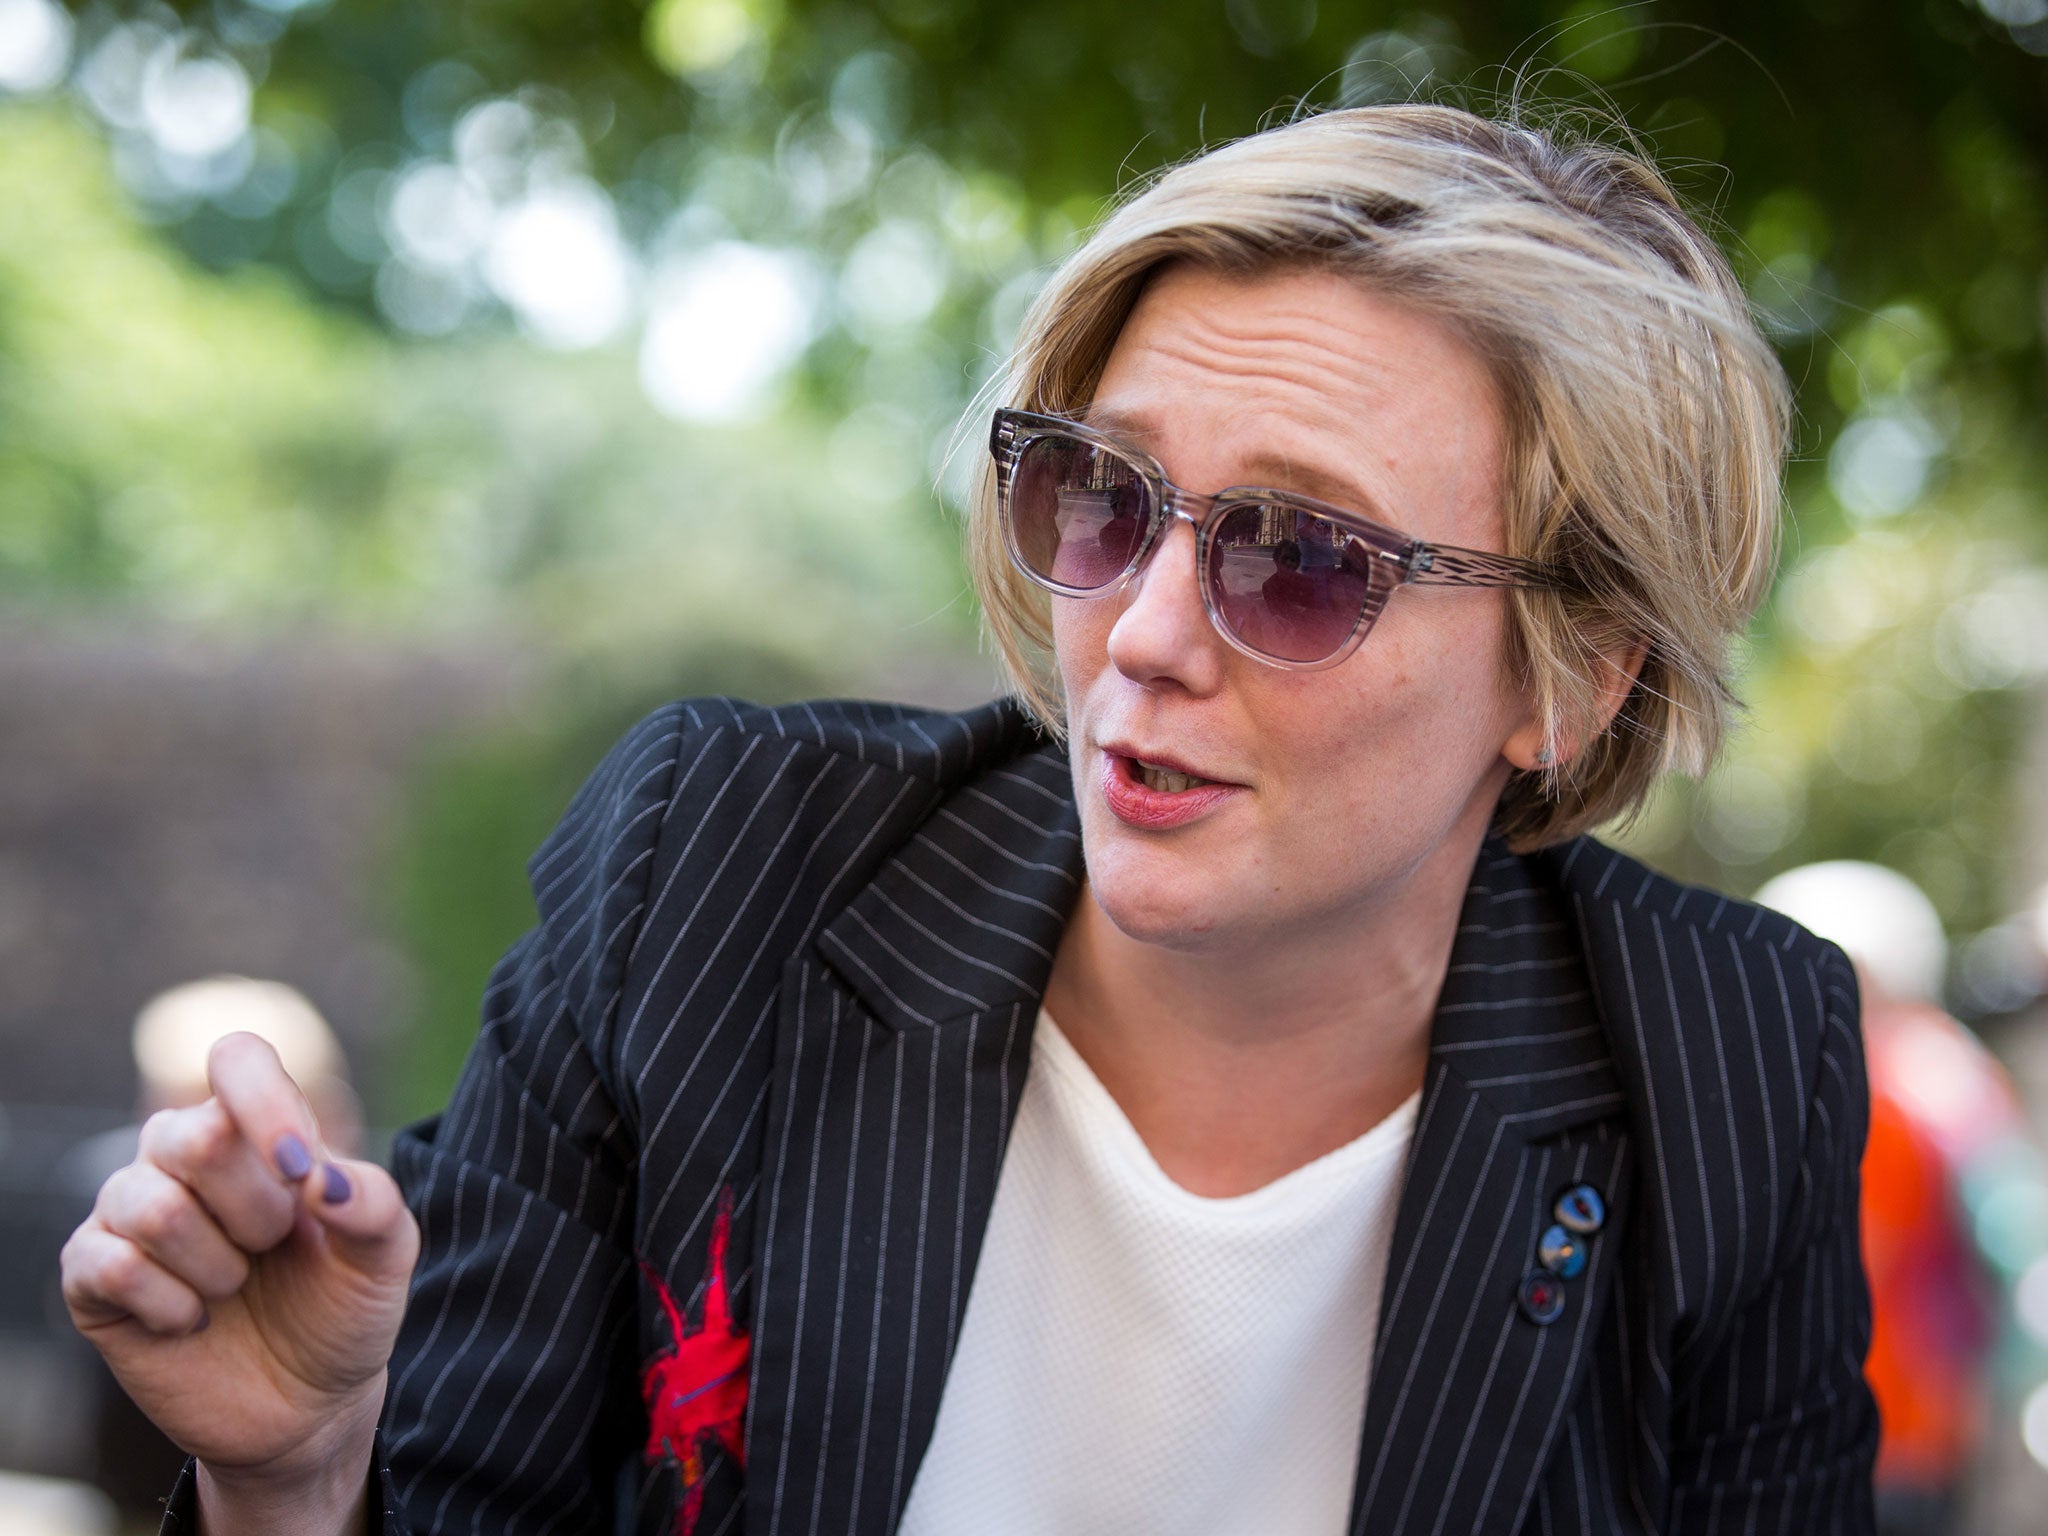 Stella Creasy’s Walthamstow office was covered with notes containing anti-war slogans